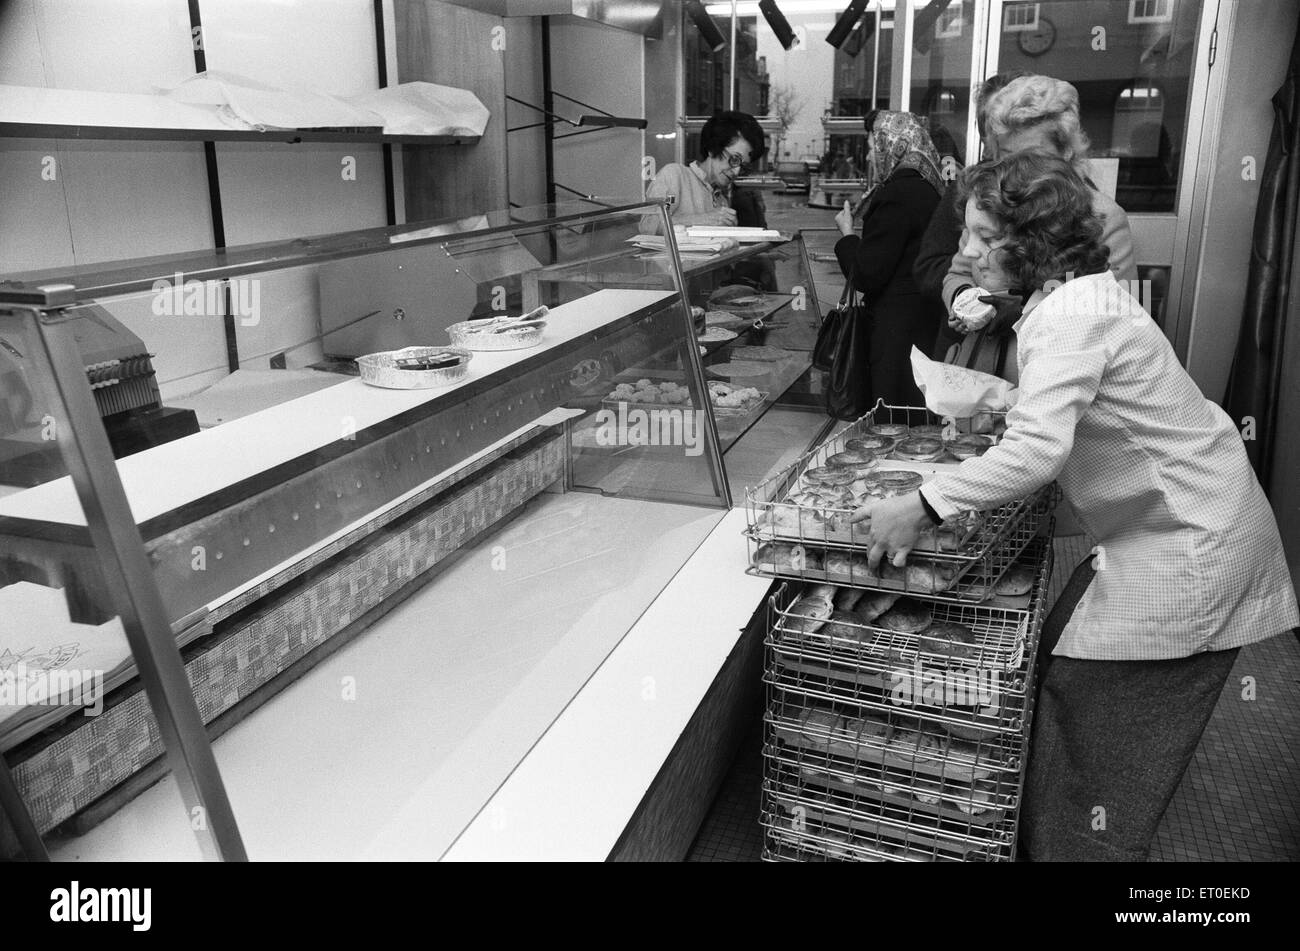 THE SEVENTIES were a time of strikes and, in December 1974, the big national bakers decided to follow suit, demanding a 66% pay rise. Staff of larger firms had empty shelves and had to turn away dozens of customers. Small bakeries were working full-out but were unable to meet the demand as shops phoned in for extra supplies. Yeast sales went up as housewives decided to bake their own bread. (Picture) Empty shelves in bakery. 3rd December 1974 Stock Photo